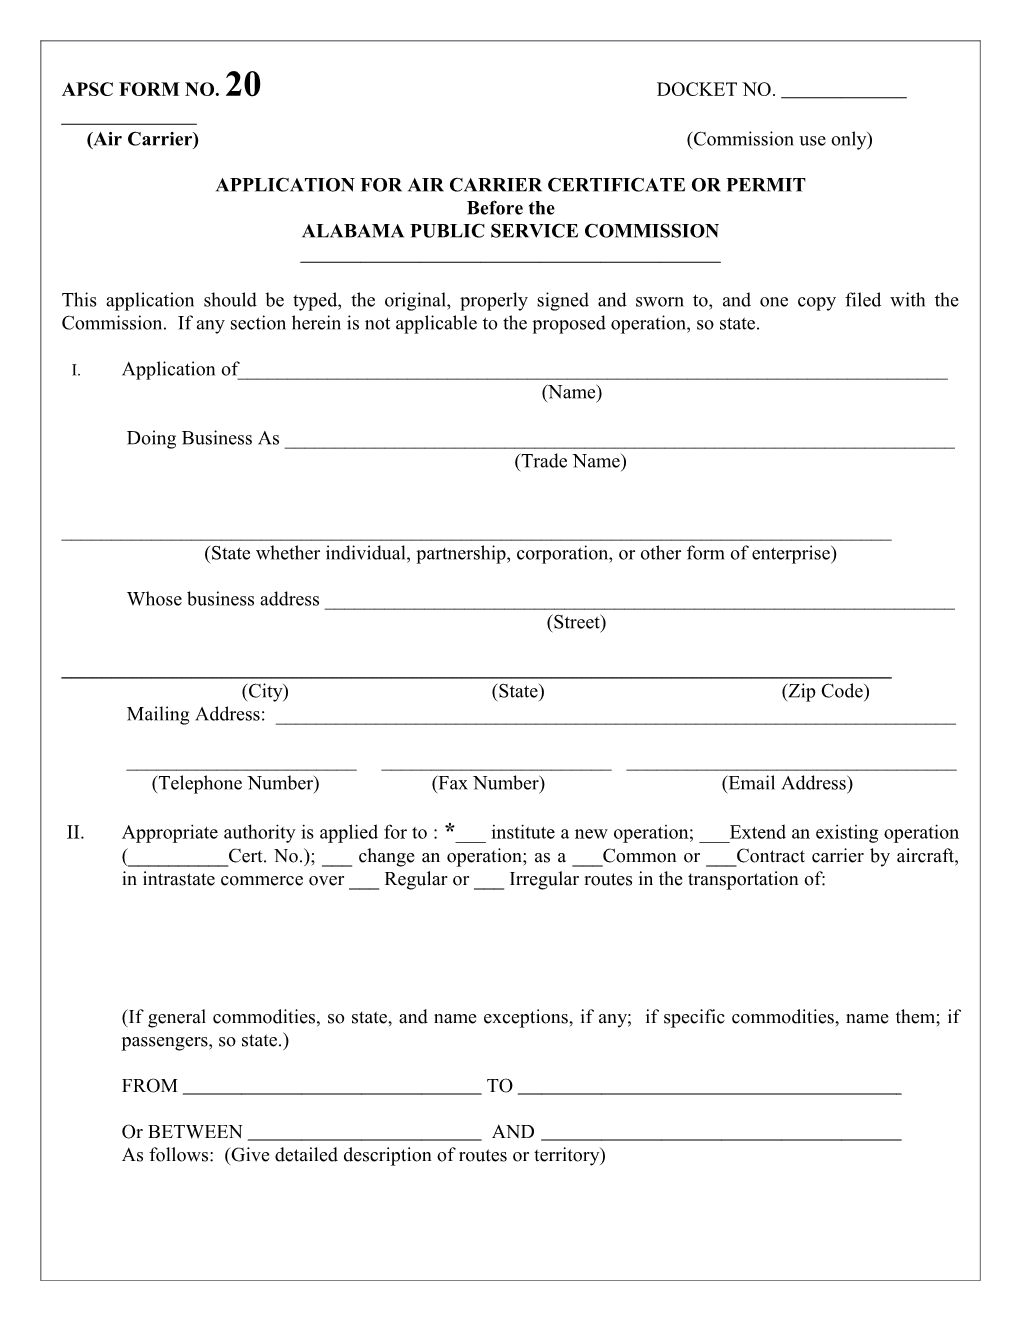 Application for Air Carrier Certificate Or Permit